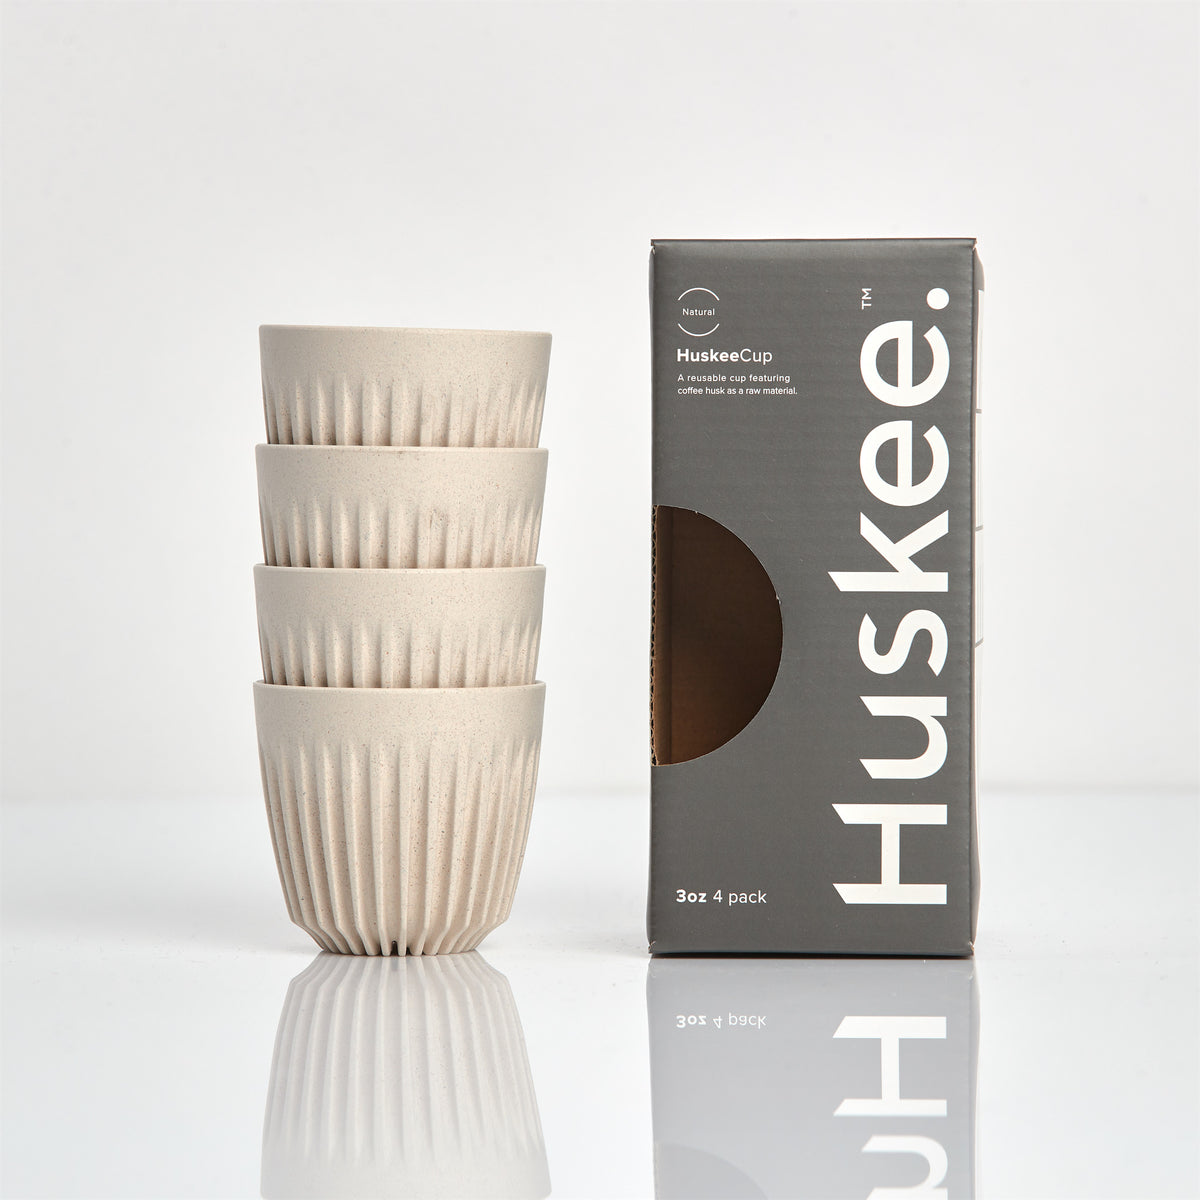 Huskee Cup - Natural Cups 4 pack